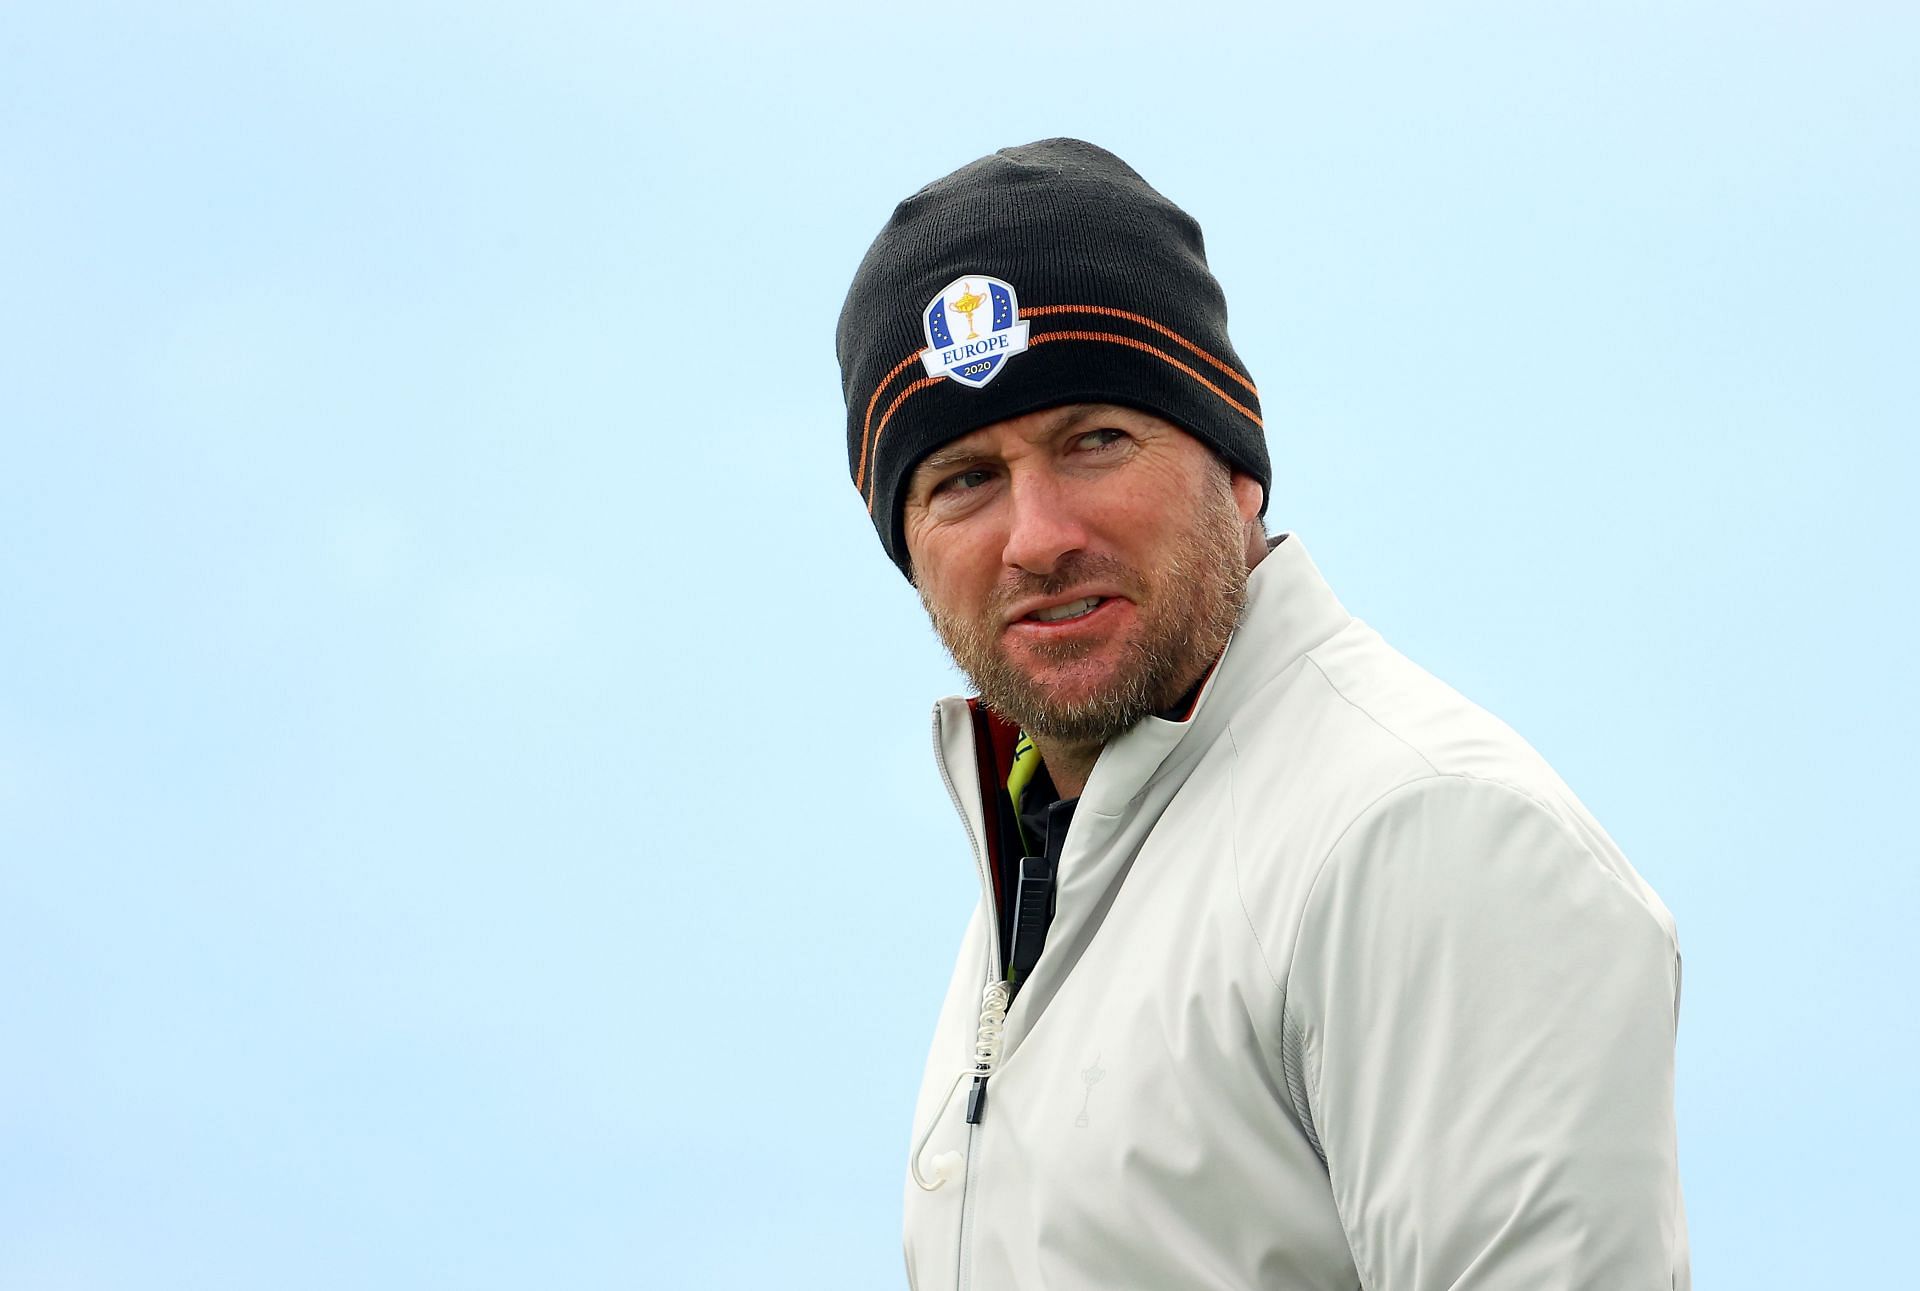 Graeme McDowell at the 43rd Ryder Cup - Previews (Image via Andrew Redington/Getty Images)